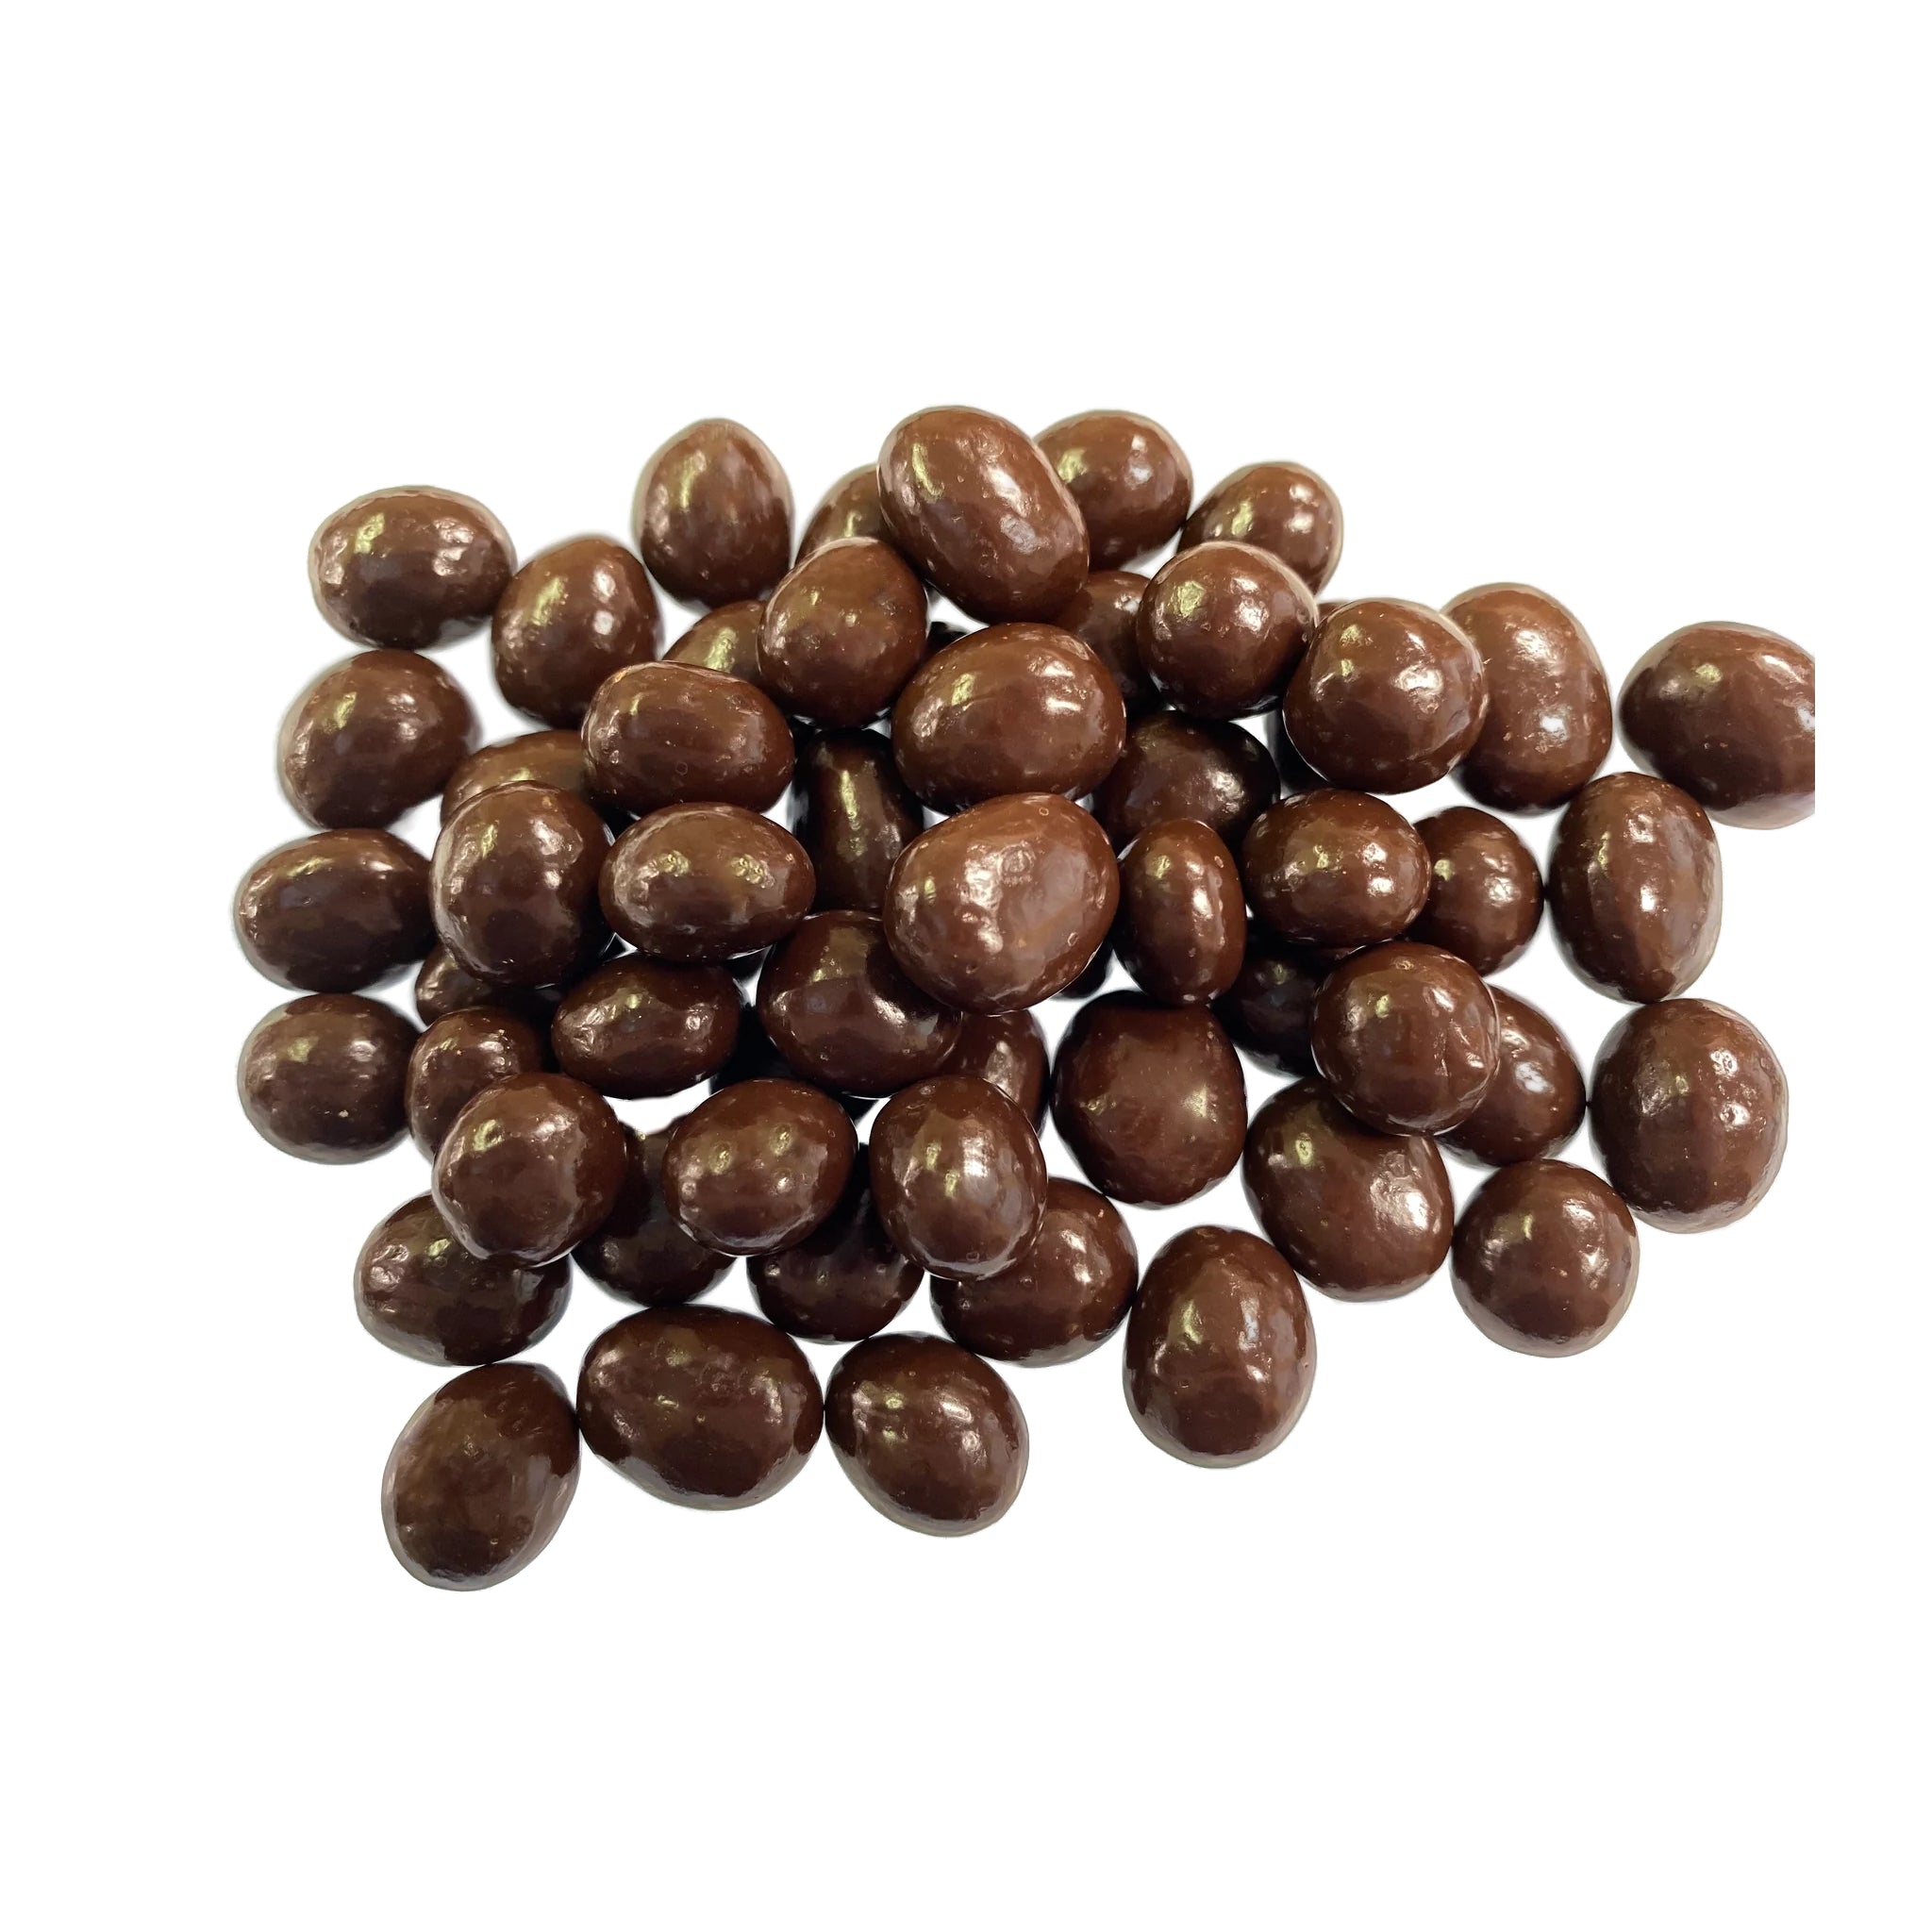 Bean size pieces covered in Dark Chocolate decafinated 